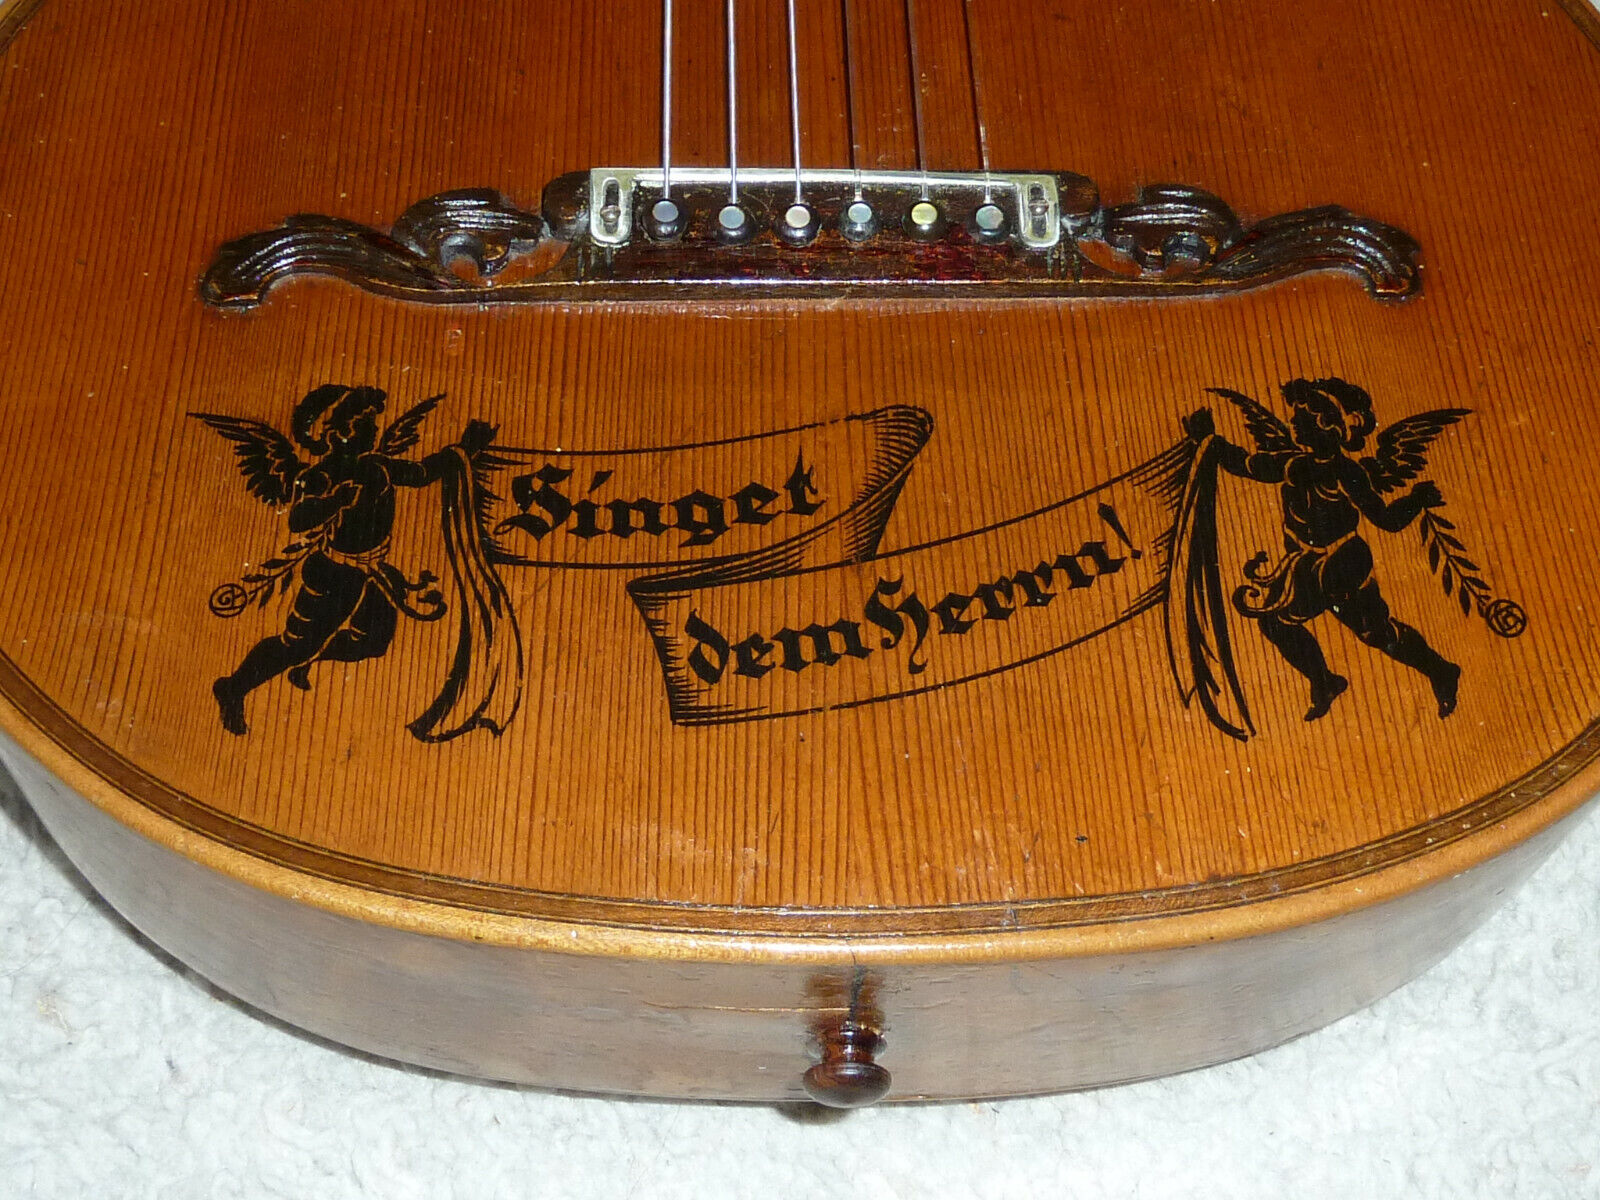 Restored ready to play old antique guitar "Singet the Lord" with Video